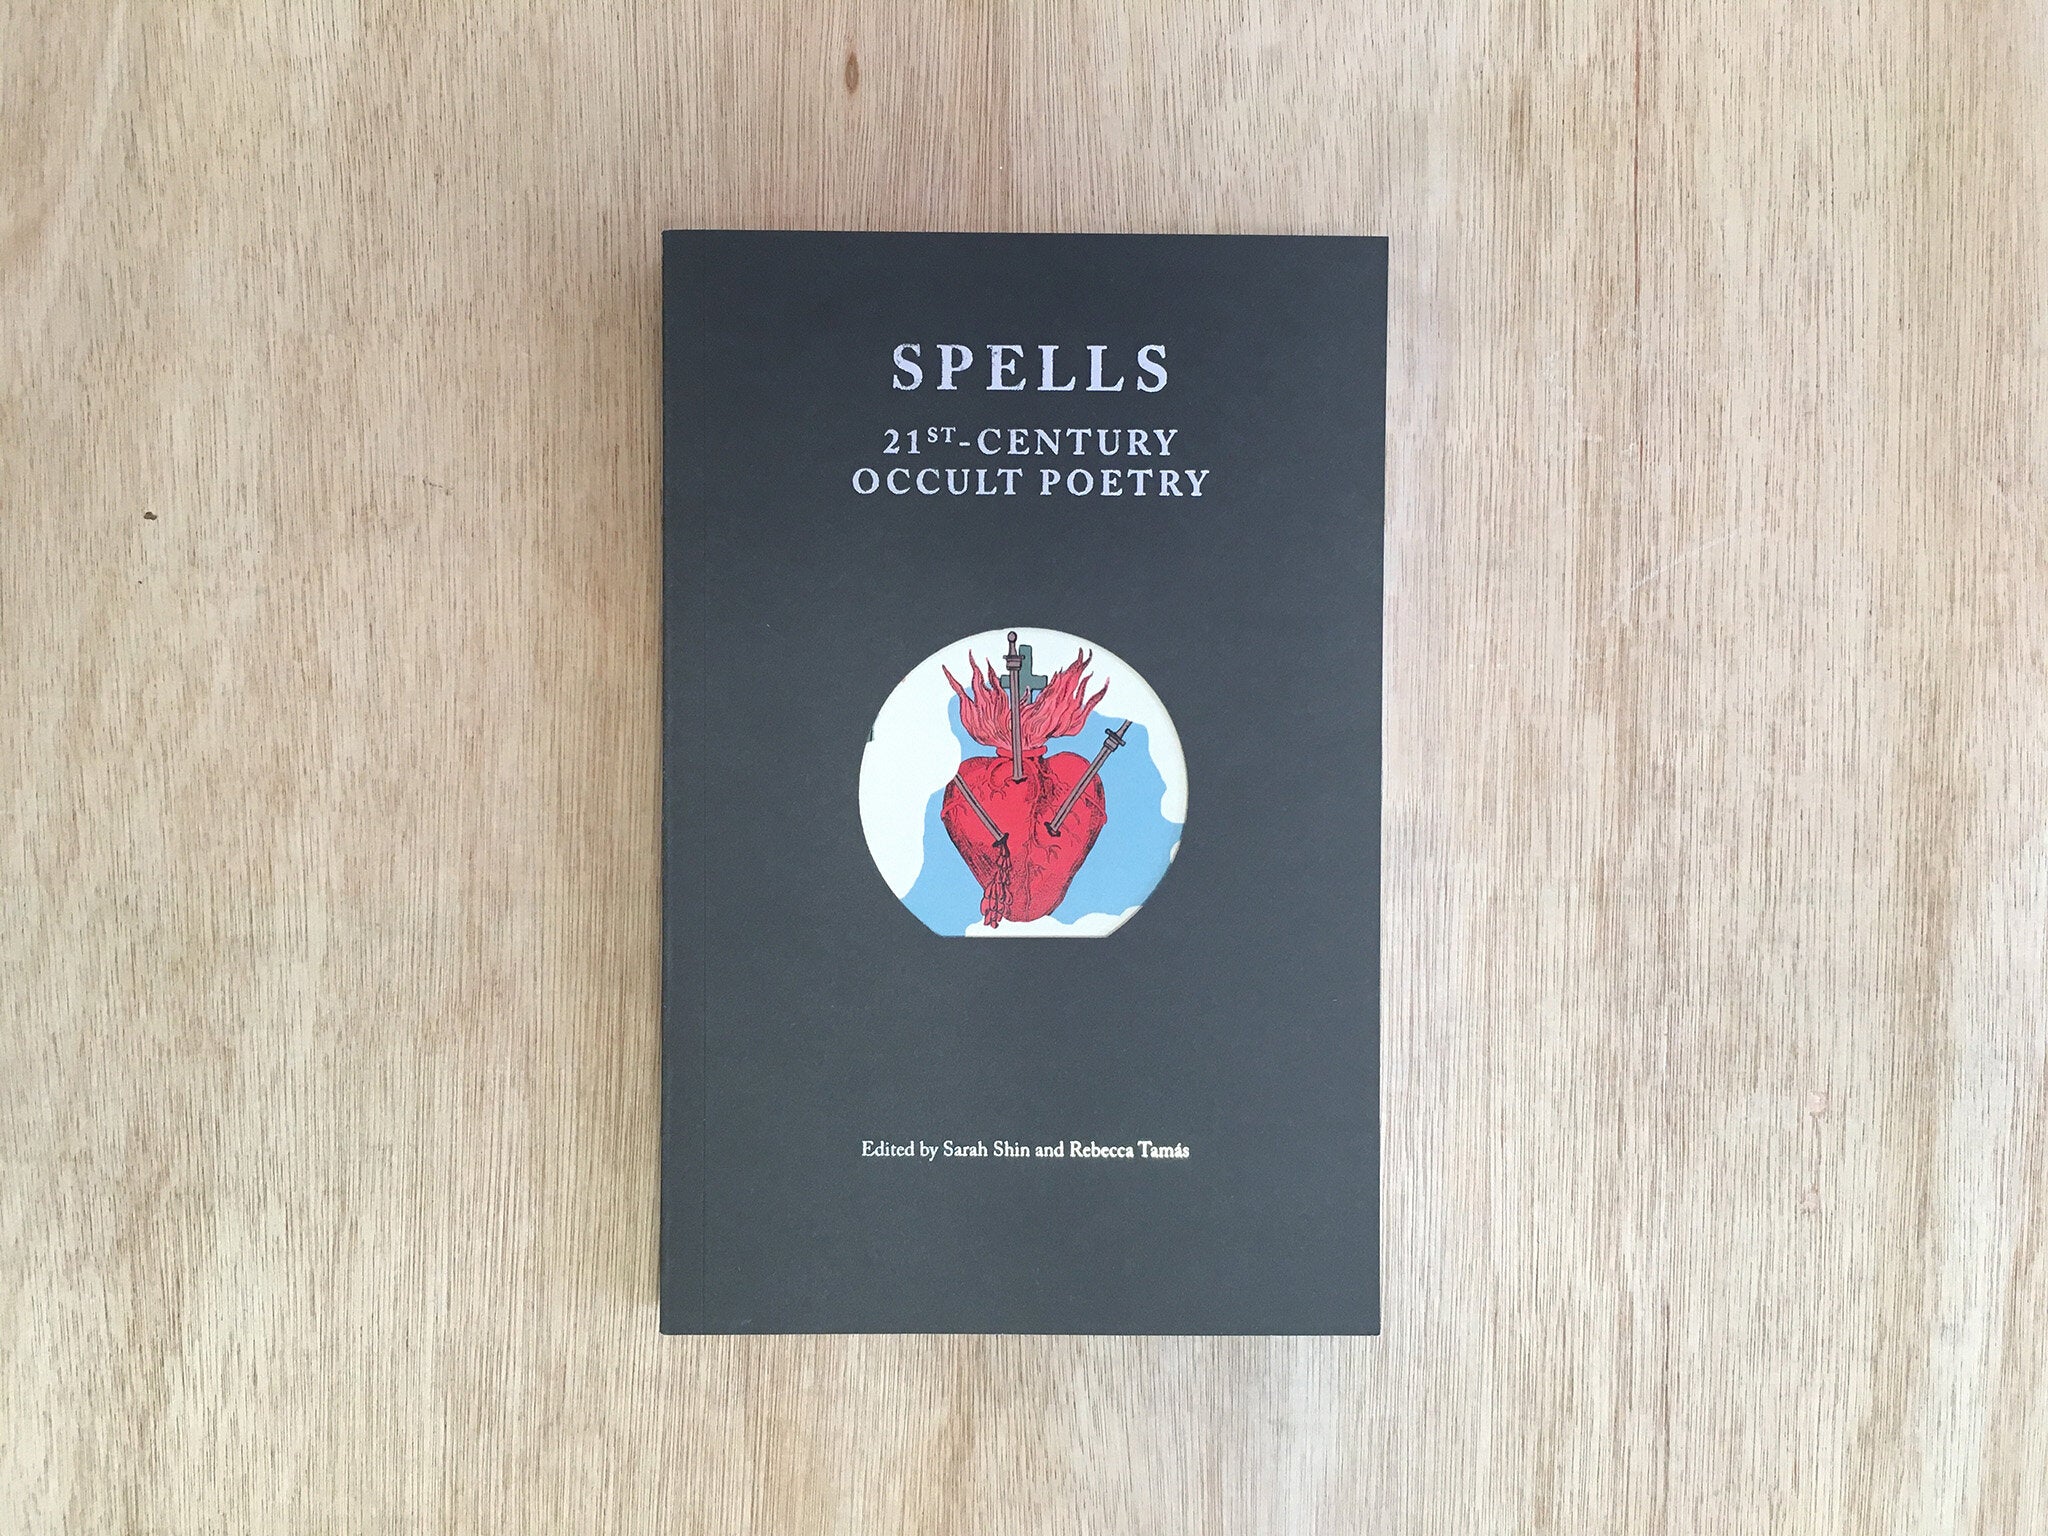 SPELLS: 21ST-CENTURY OCCULT POETRY by Various Artists